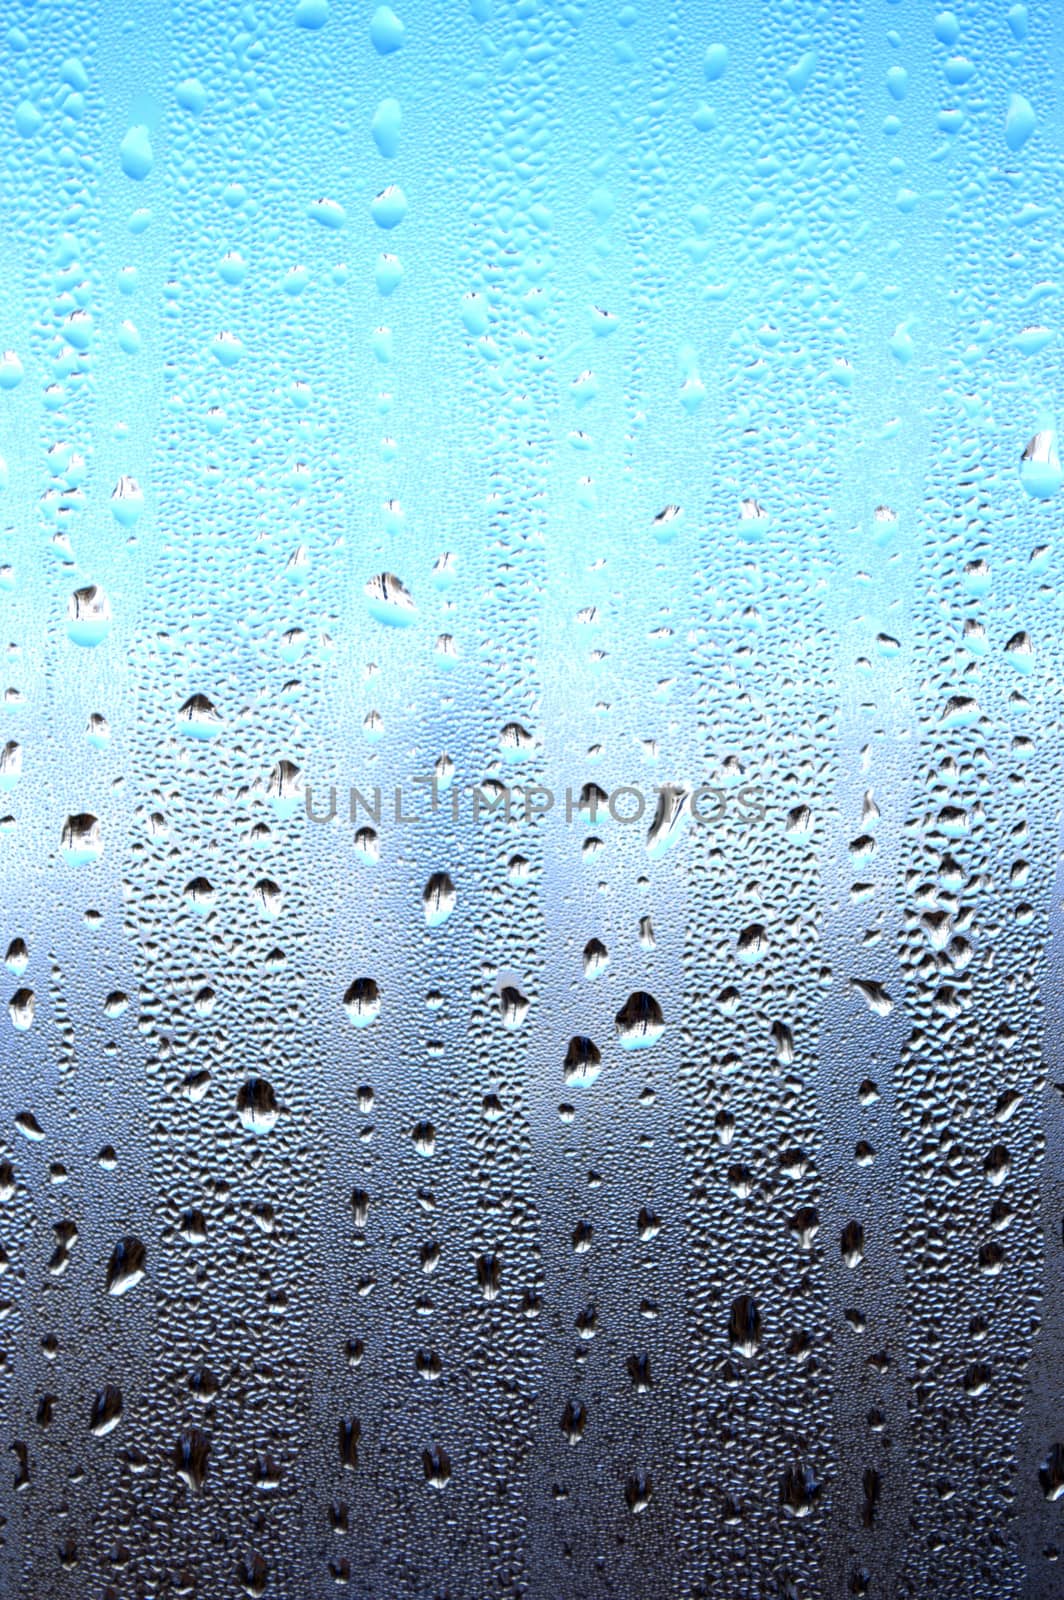 background with drops on glass